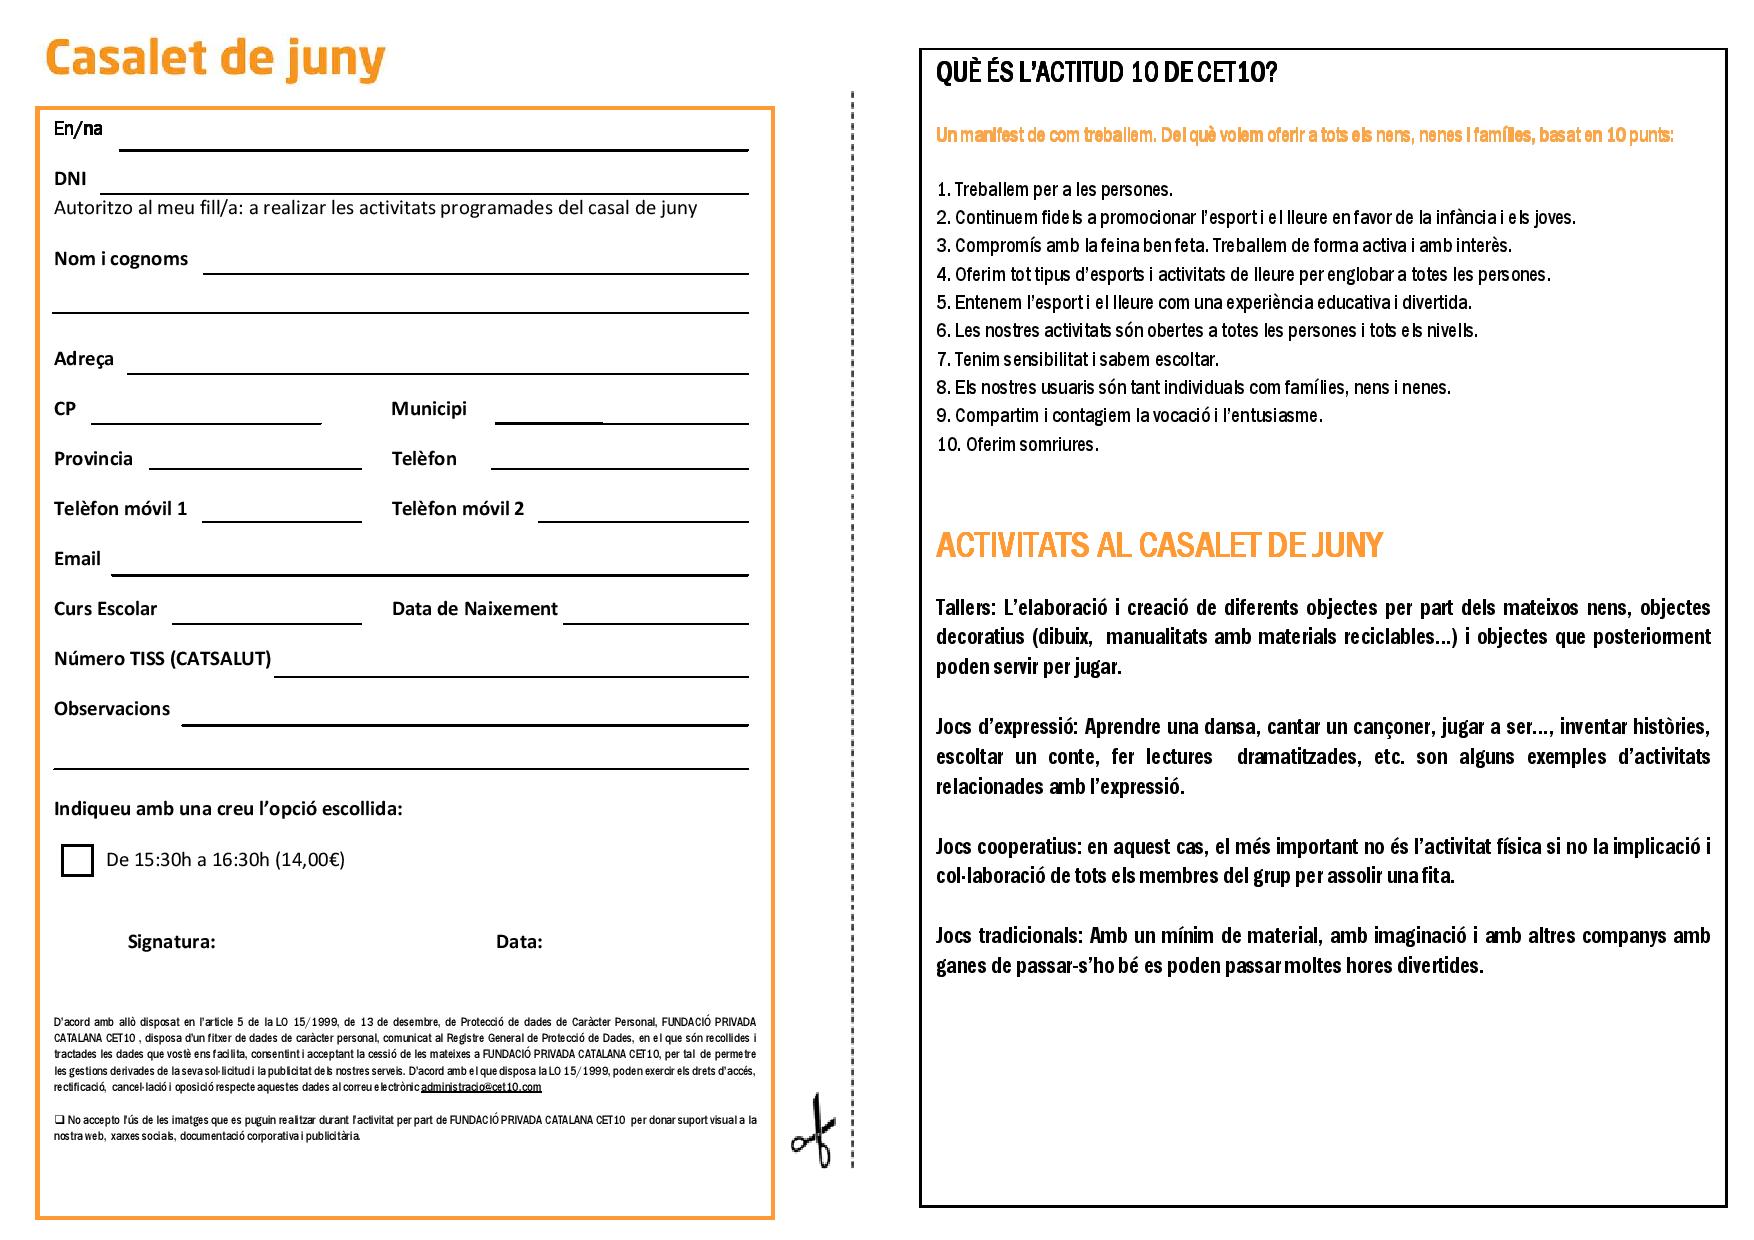 INFO-CASALET JUNY PACO CANDEL 14-page-002